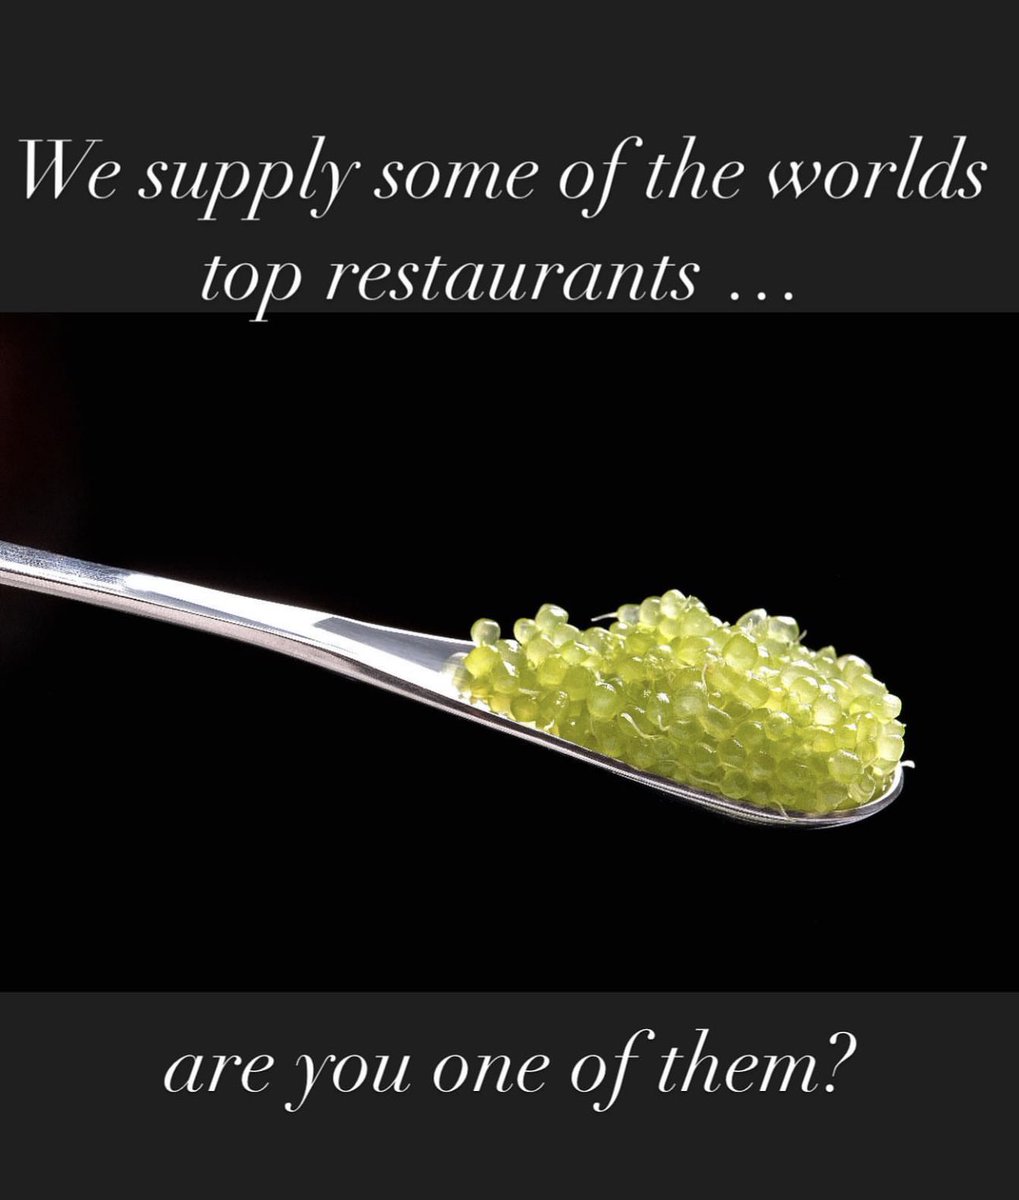 We supply some of the worlds top restaurants. Are you one of them? For more information: info@limecaviar.net #limecaviar #fingerlimes #fingerlime #export #exportquality #top50restaurants #top100restaurants #scenicrim #queensland #australia